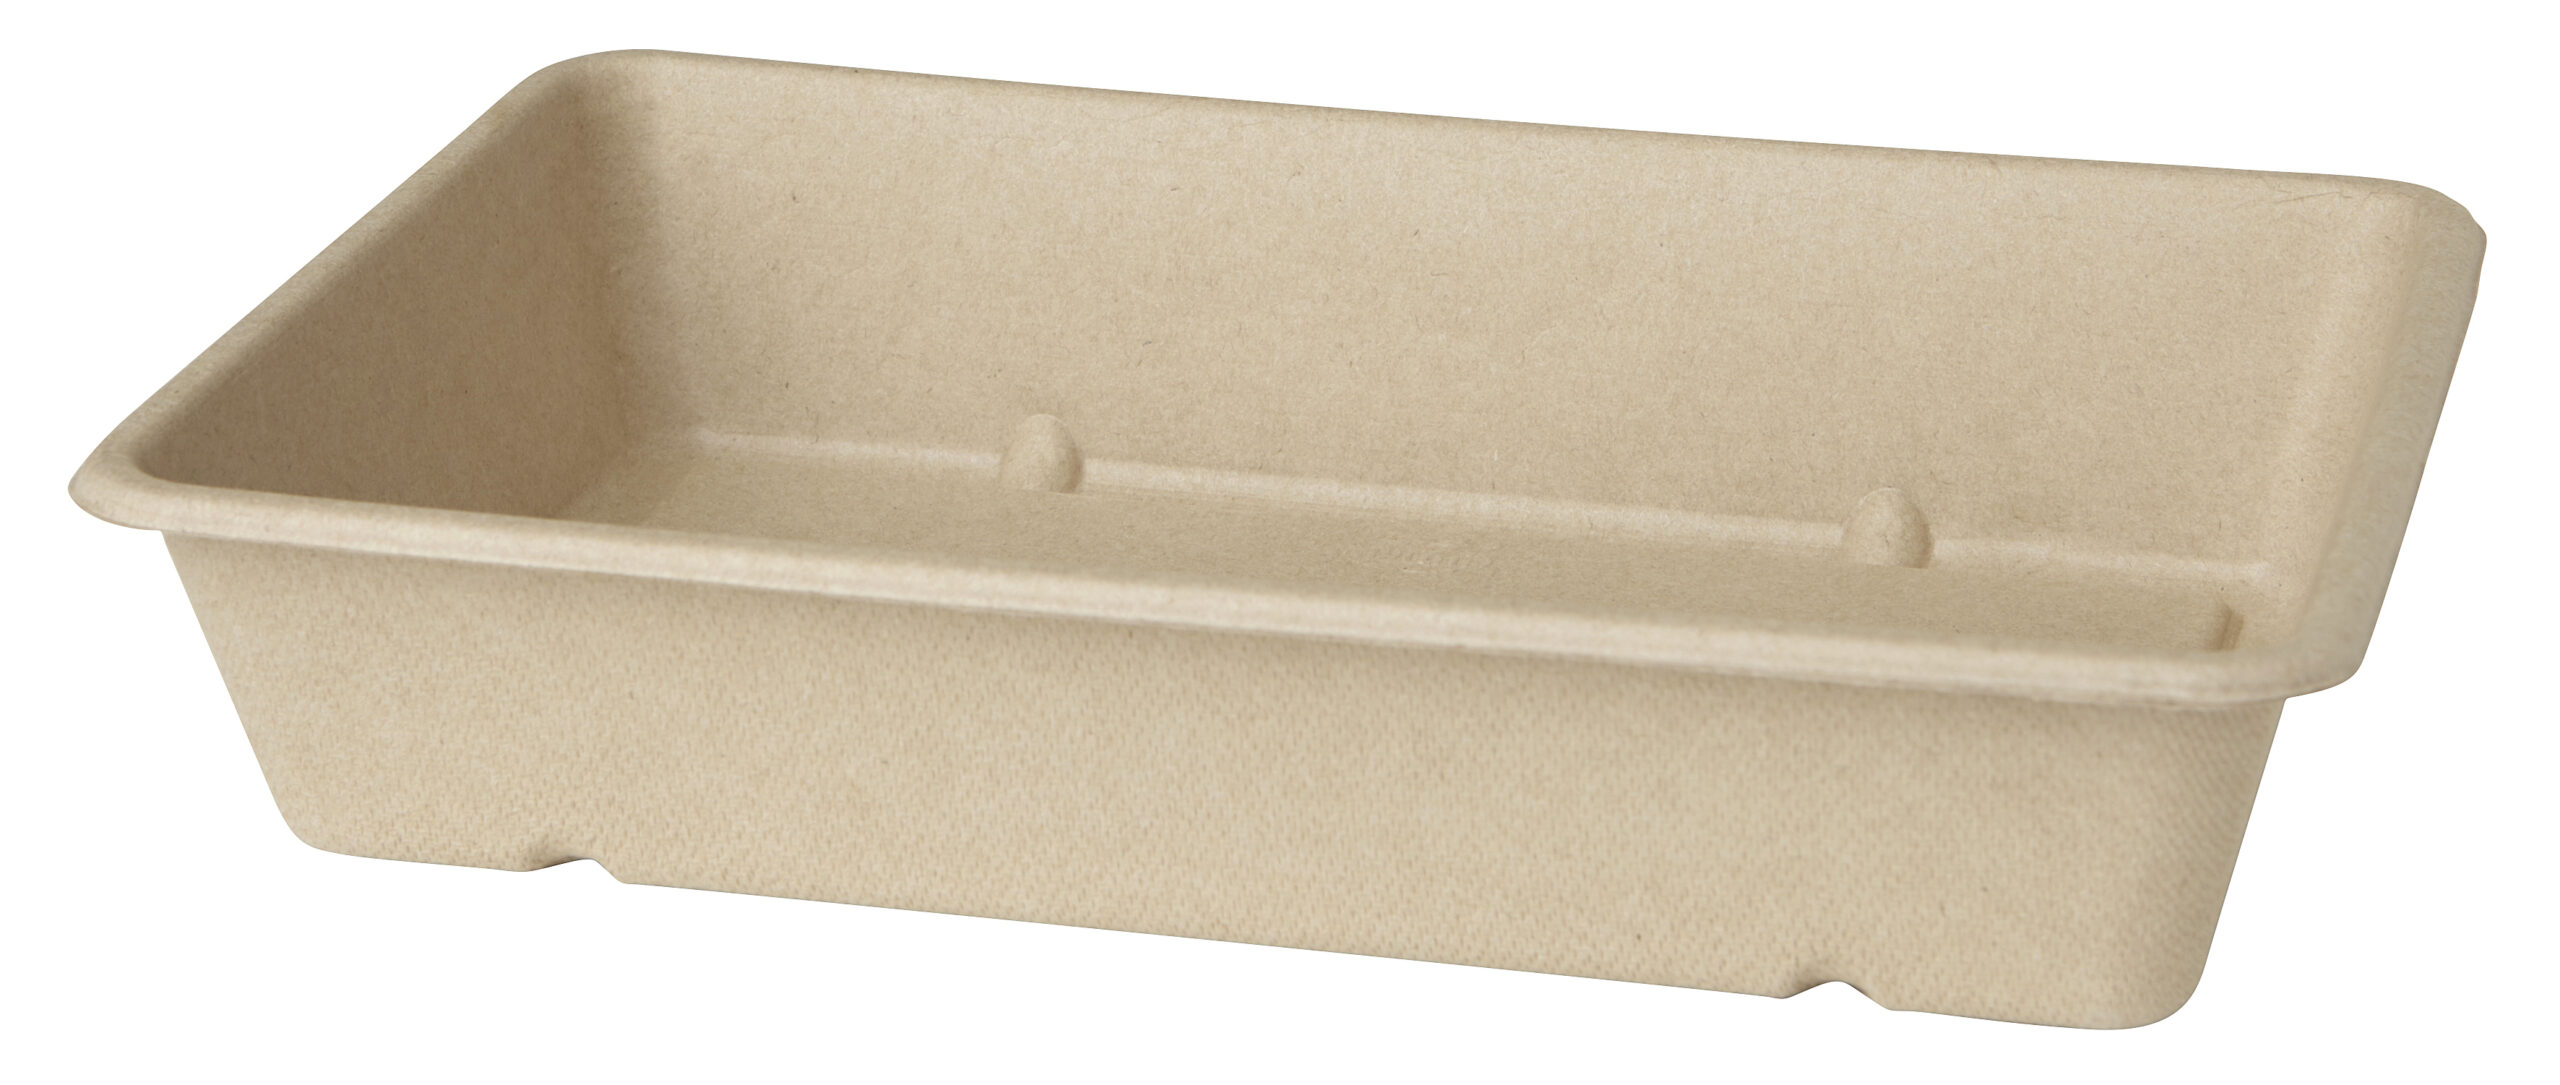 Bagasse Box Br. Rect.1200Ml Eco 480P